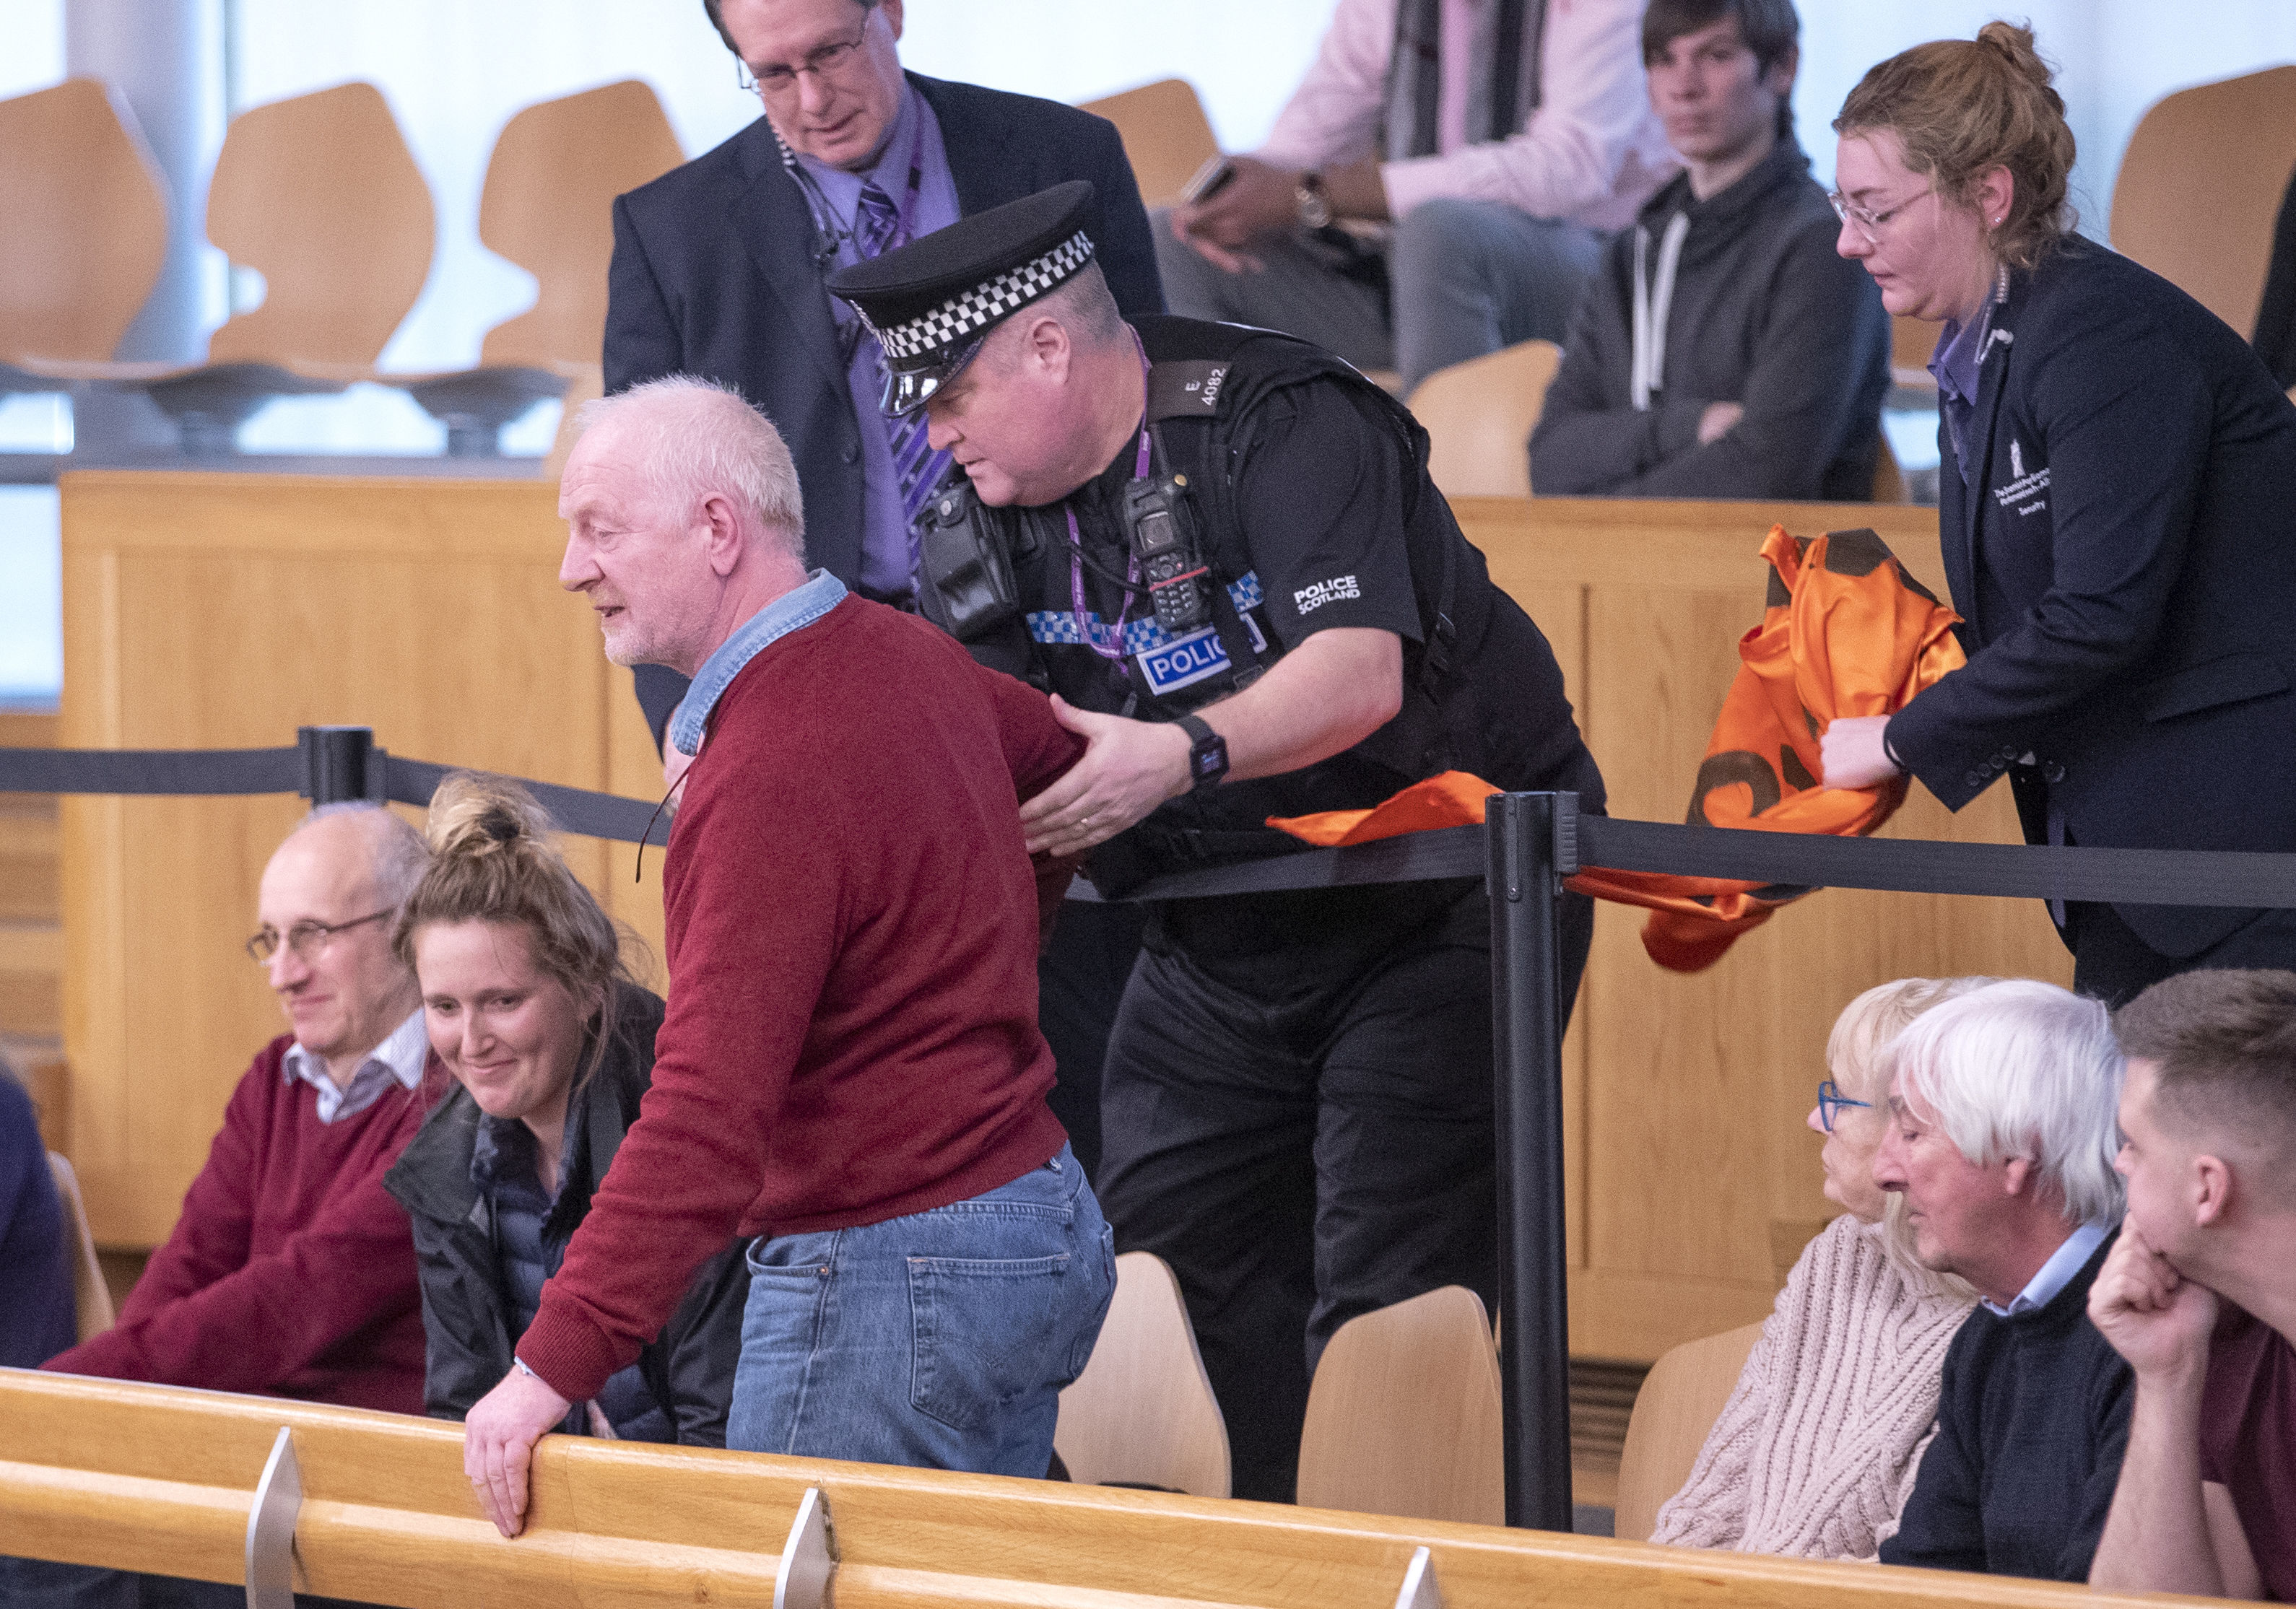 A climate change protester is removed by police from the public gallery during First Minister's Questions at the Scottish Parliament in Edinburgh